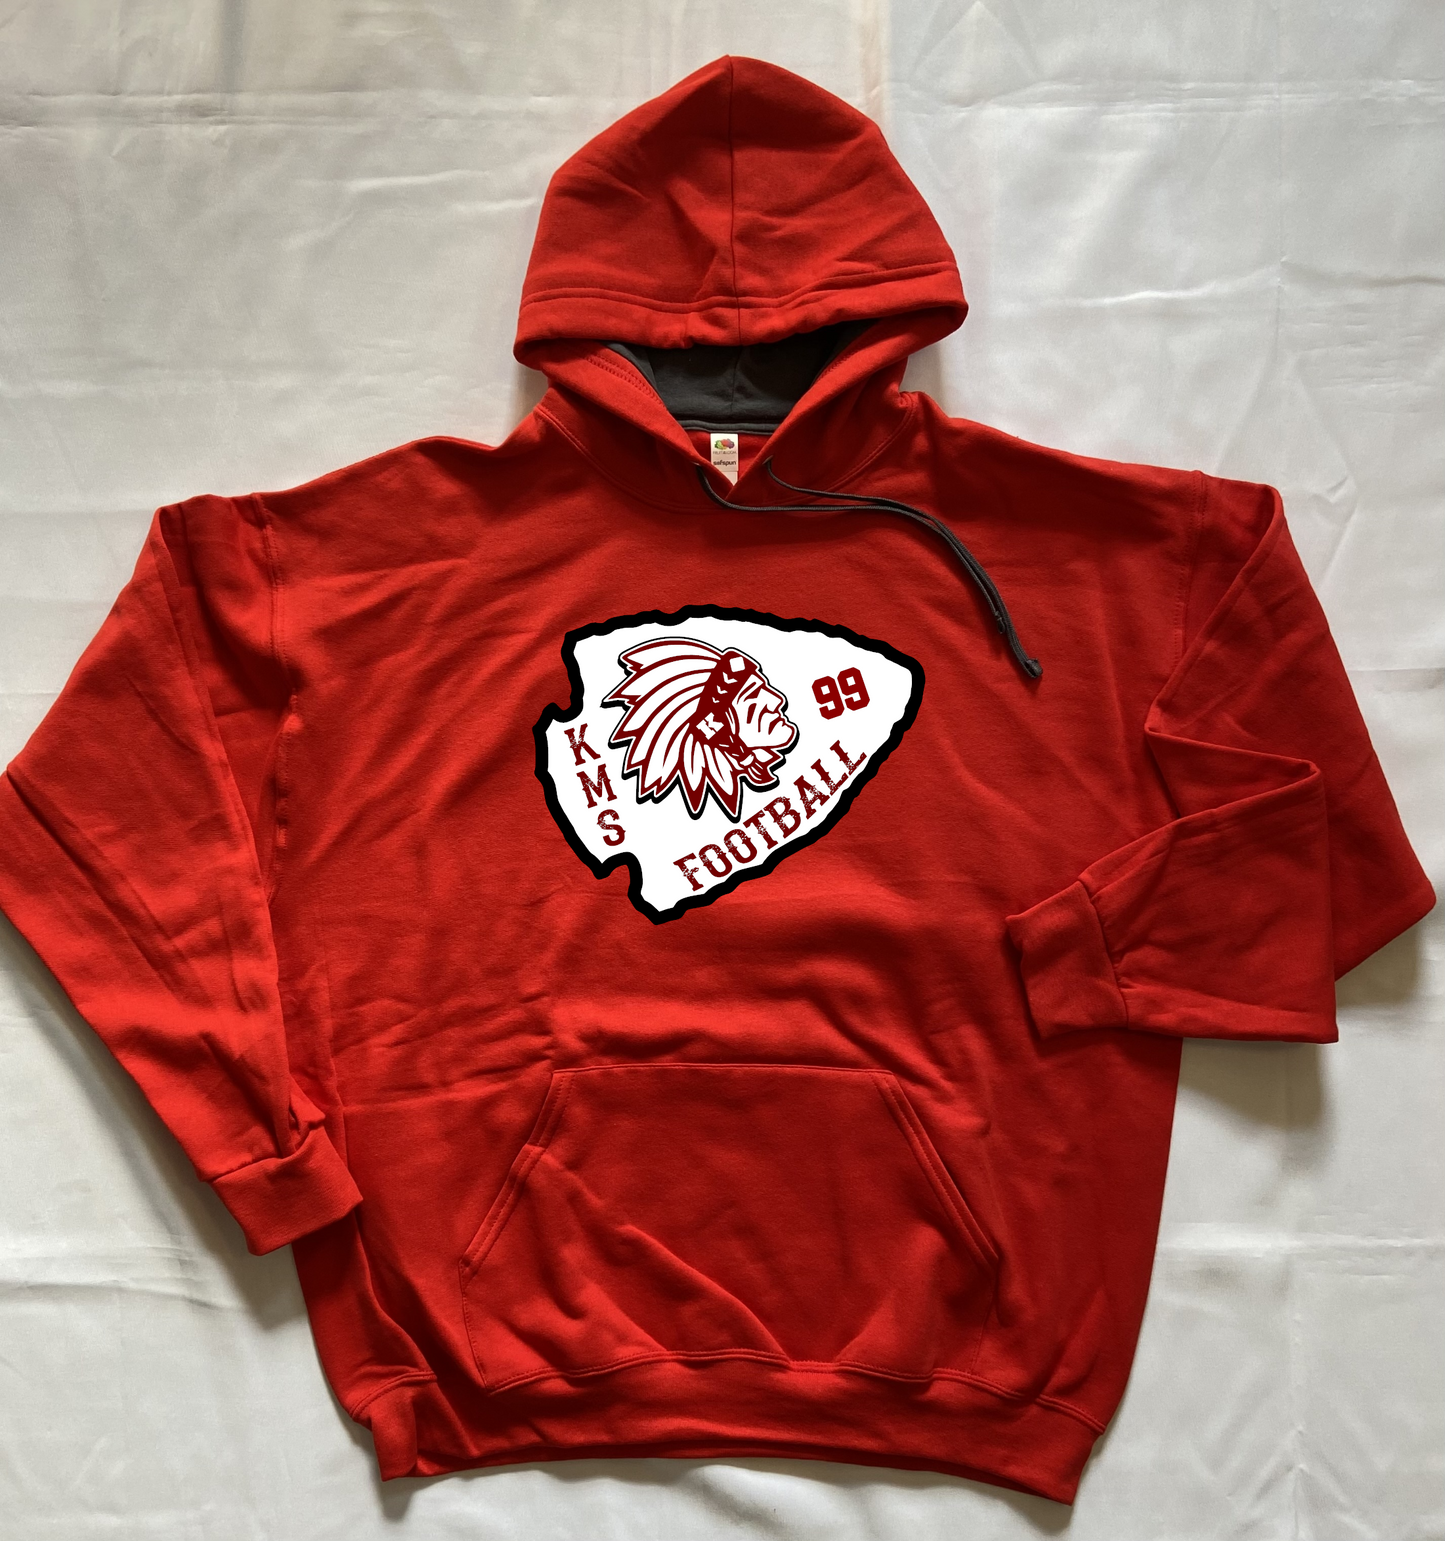 KMS Redskins FOOTBALL Hoodie w/ Player Number- Red - Adult and Youth Sizes